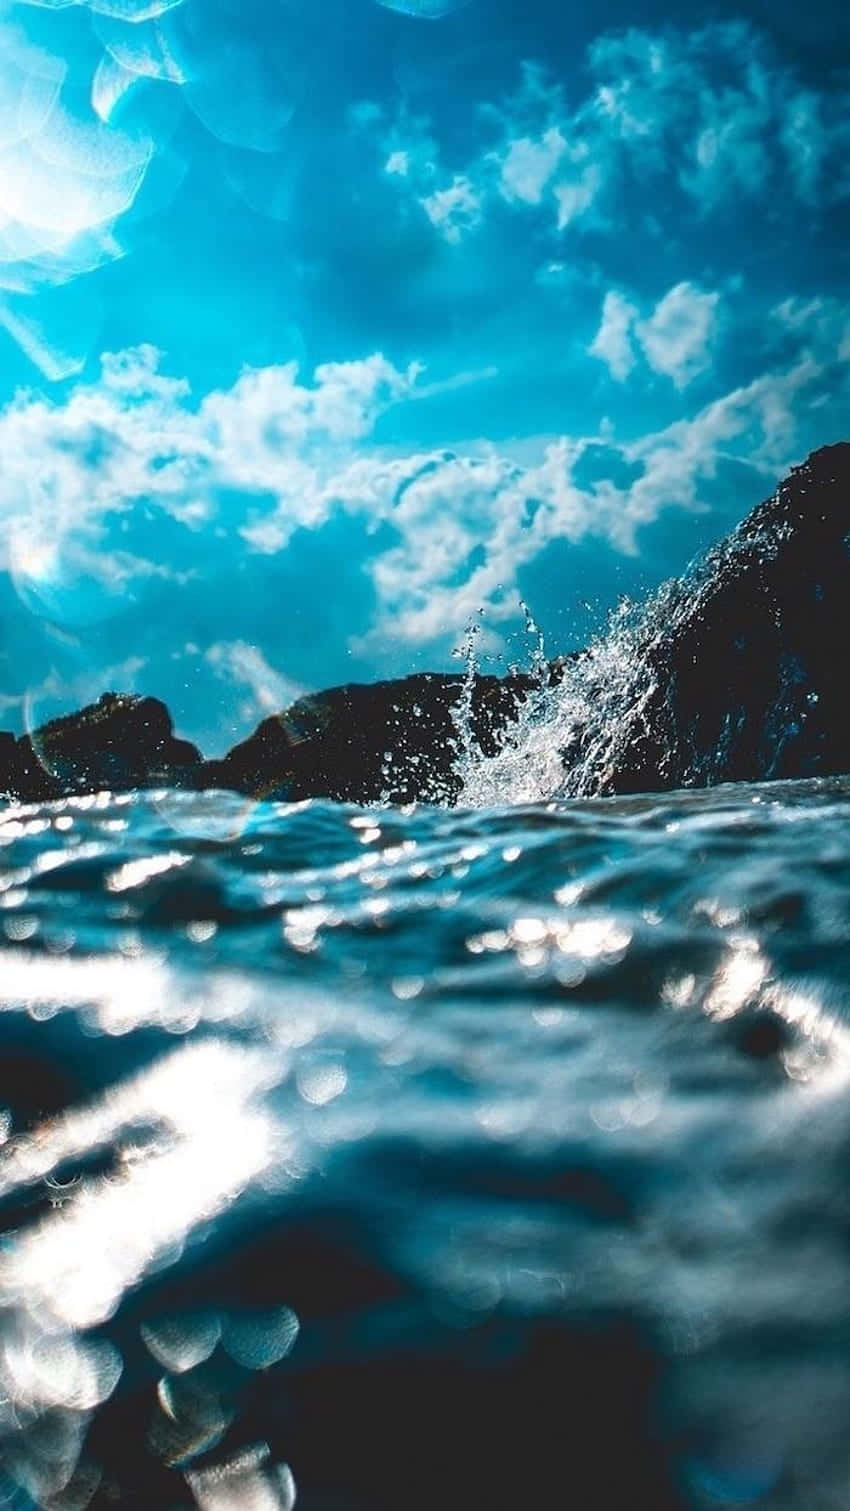 A Blue Sky With Clouds And Water Splashing Wallpaper